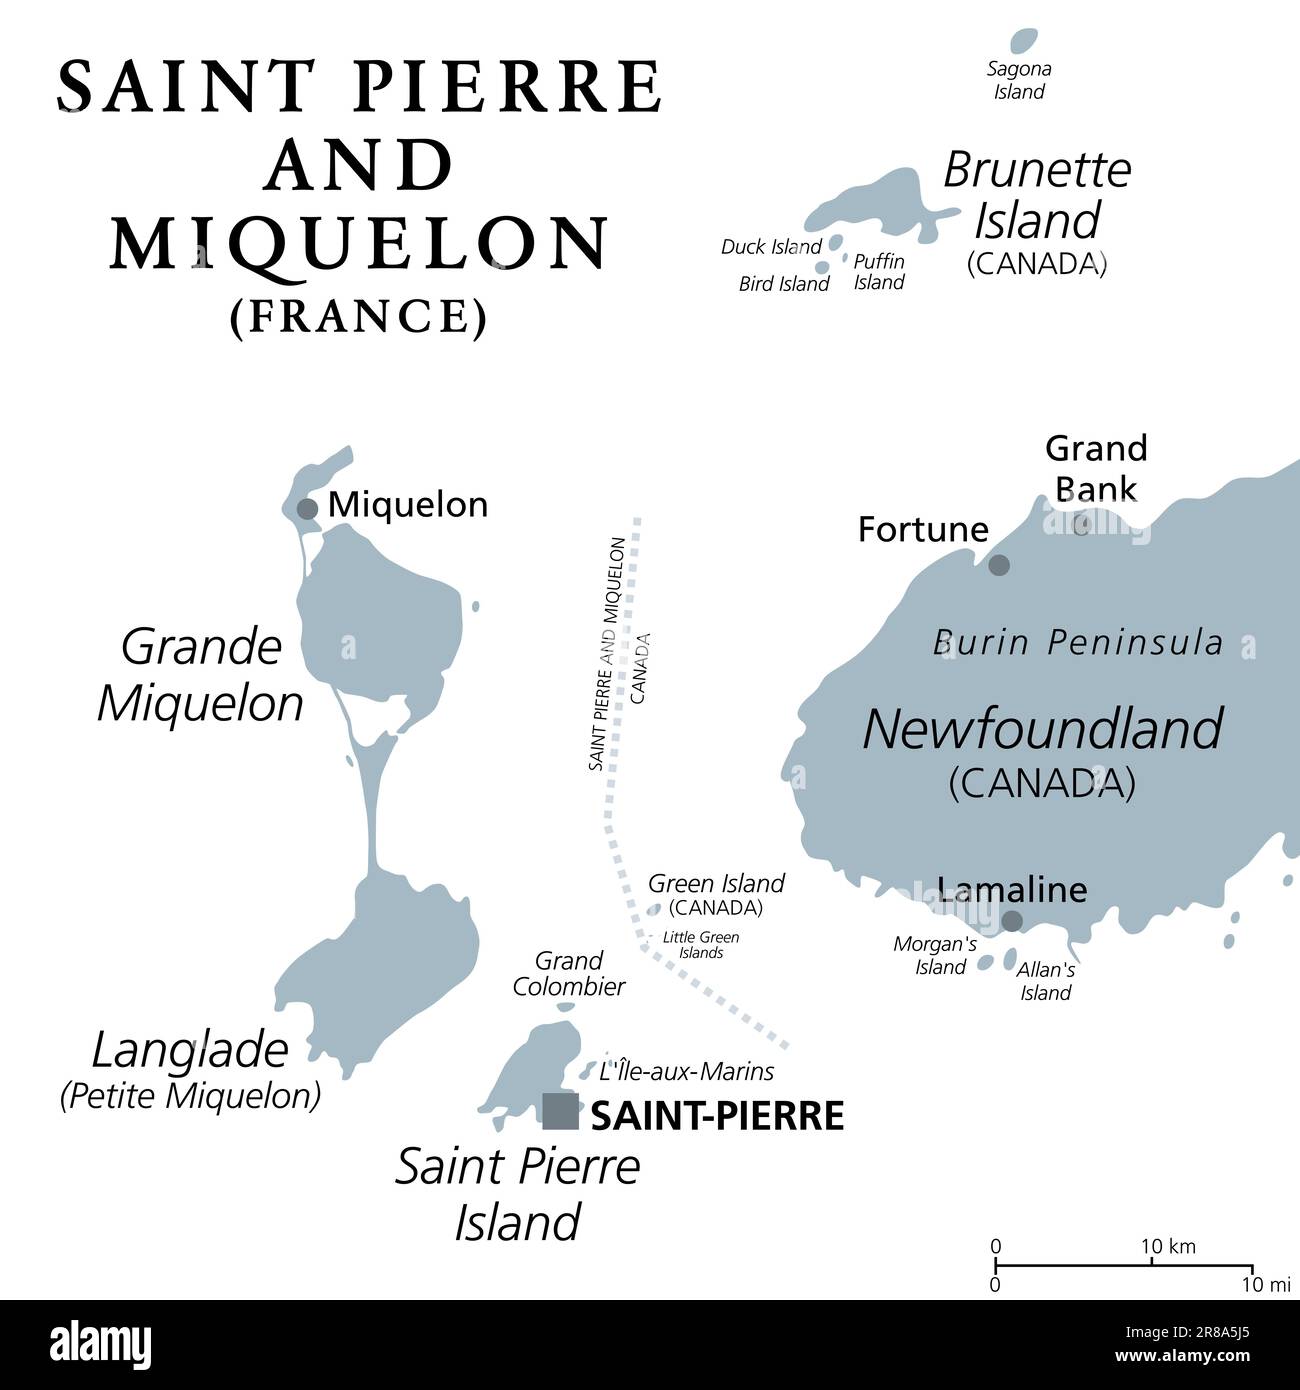 Saint Pierre and Miquelon, gray political map. Archipelago and self-governing territorial overseas collectivity of France in the North Atlantic. Stock Photo